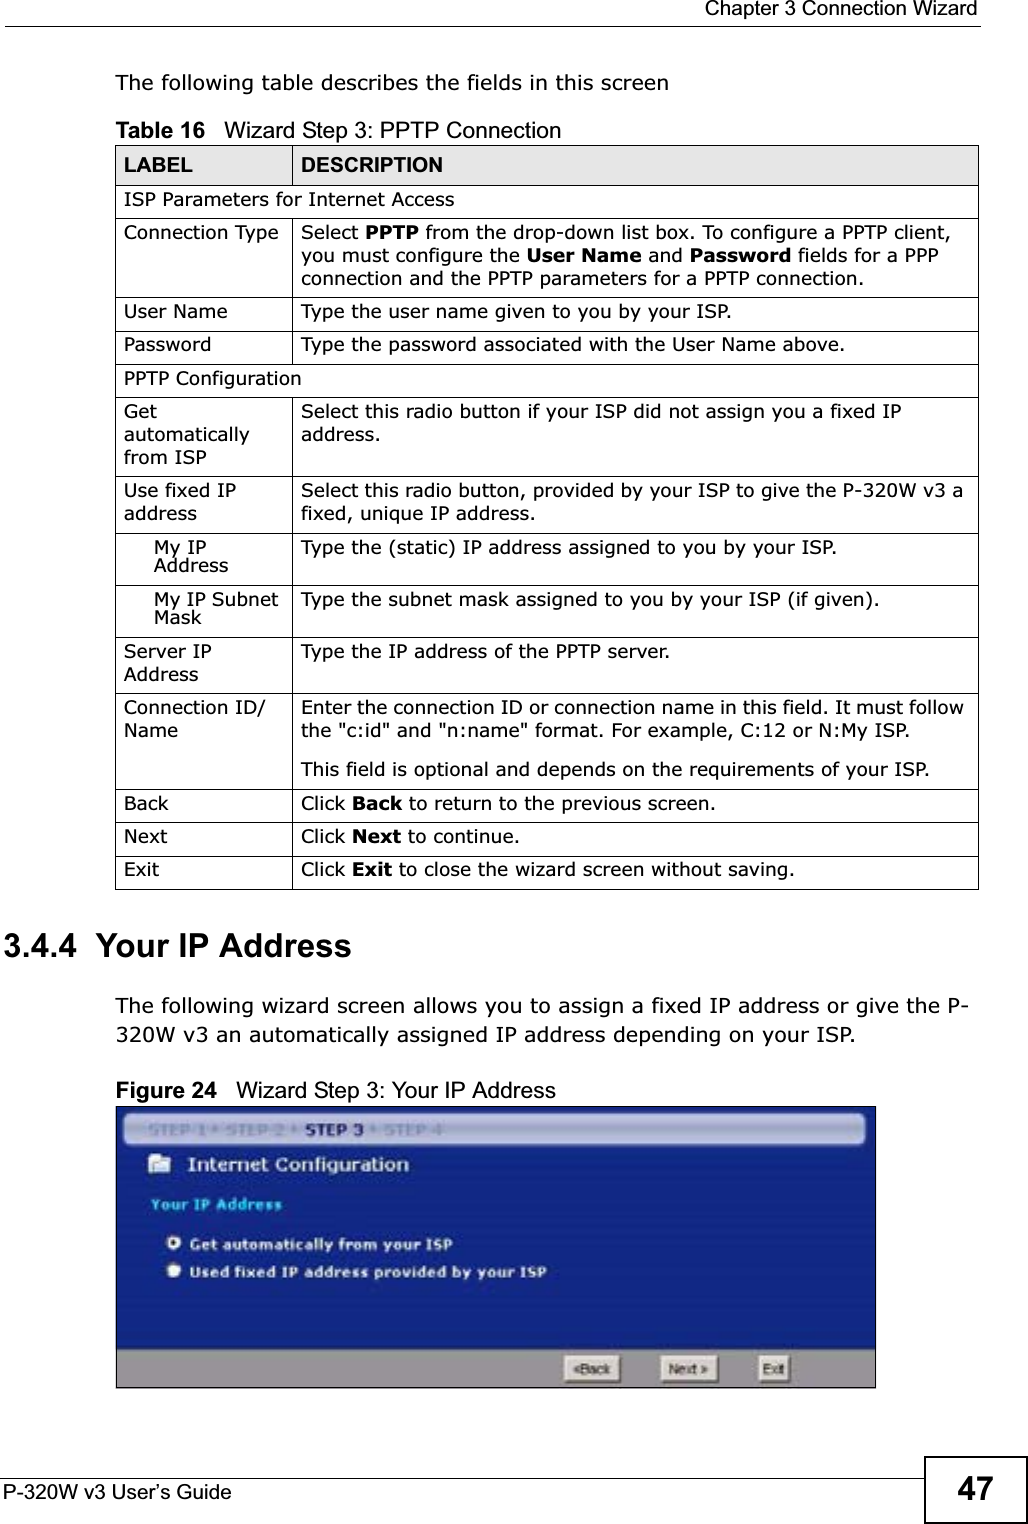  Chapter 3 Connection WizardP-320W v3 User’s Guide 47The following table describes the fields in this screen3.4.4  Your IP AddressThe following wizard screen allows you to assign a fixed IP address or give the P-320W v3 an automatically assigned IP address depending on your ISP.Figure 24   Wizard Step 3: Your IP AddressTable 16   Wizard Step 3: PPTP ConnectionLABEL DESCRIPTIONISP Parameters for Internet AccessConnection Type Select PPTP from the drop-down list box. To configure a PPTP client, you must configure the User Name and Password fields for a PPP connection and the PPTP parameters for a PPTP connection.User Name Type the user name given to you by your ISP. Password Type the password associated with the User Name above.PPTP ConfigurationGetautomatically from ISPSelect this radio button if your ISP did not assign you a fixed IP address.Use fixed IP addressSelect this radio button, provided by your ISP to give the P-320W v3 a fixed, unique IP address.My IP Address Type the (static) IP address assigned to you by your ISP.My IP Subnet Mask Type the subnet mask assigned to you by your ISP (if given).Server IP AddressType the IP address of the PPTP server.Connection ID/NameEnter the connection ID or connection name in this field. It must follow the &quot;c:id&quot; and &quot;n:name&quot; format. For example, C:12 or N:My ISP.This field is optional and depends on the requirements of your ISP.Back Click Back to return to the previous screen.Next Click Next to continue. Exit Click Exit to close the wizard screen without saving.